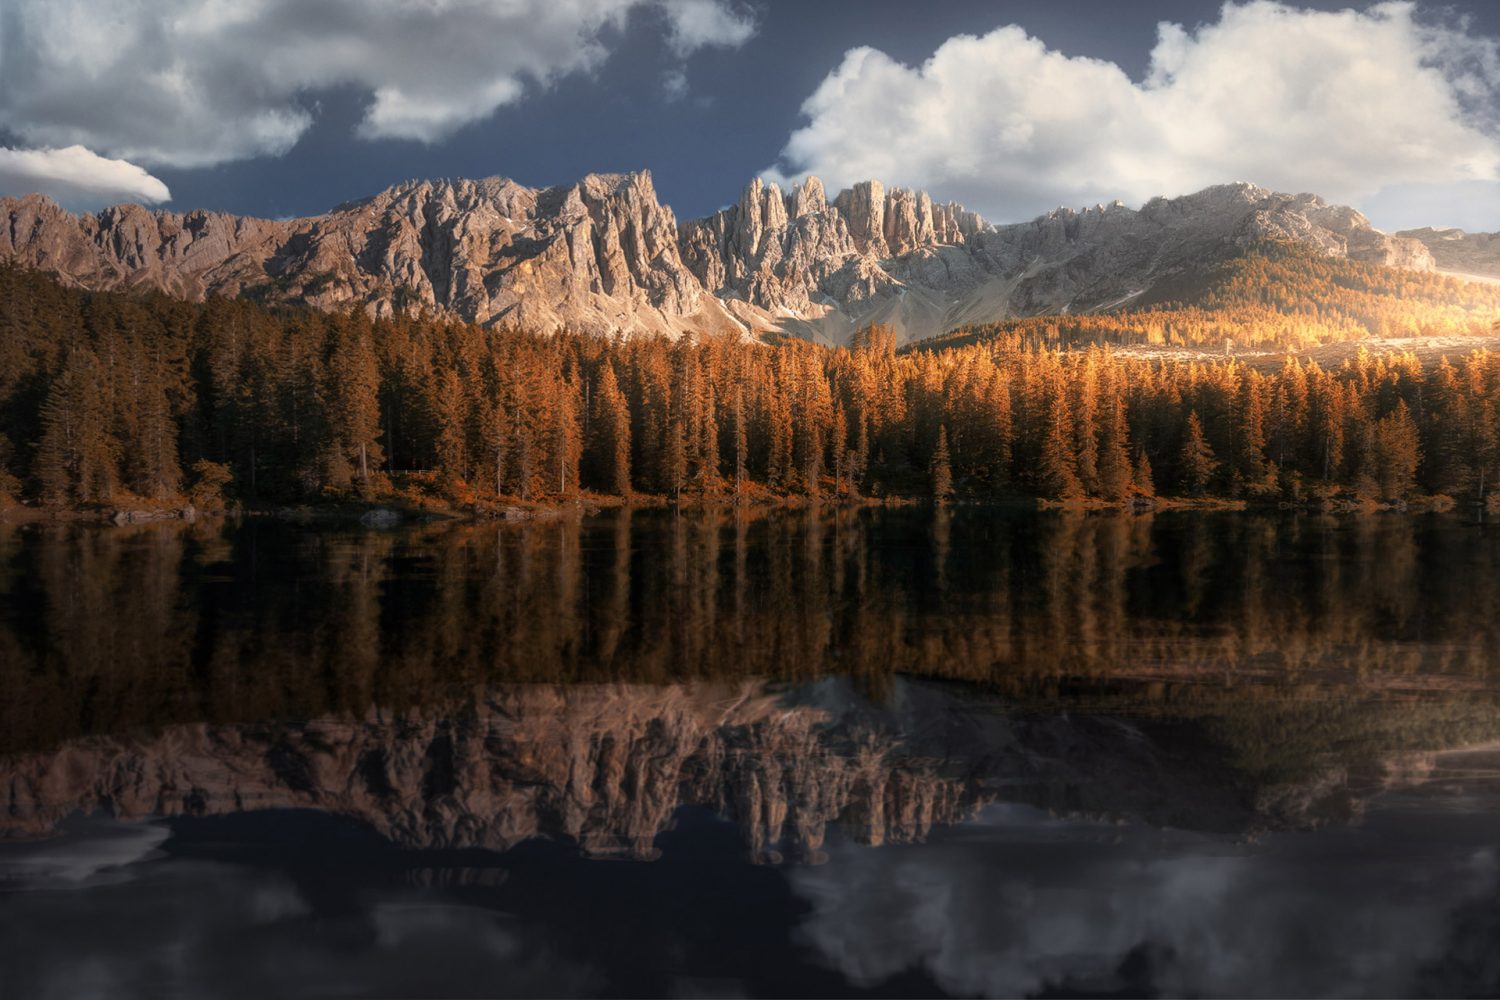 Sunset in Dolomites with a reflection in a lake